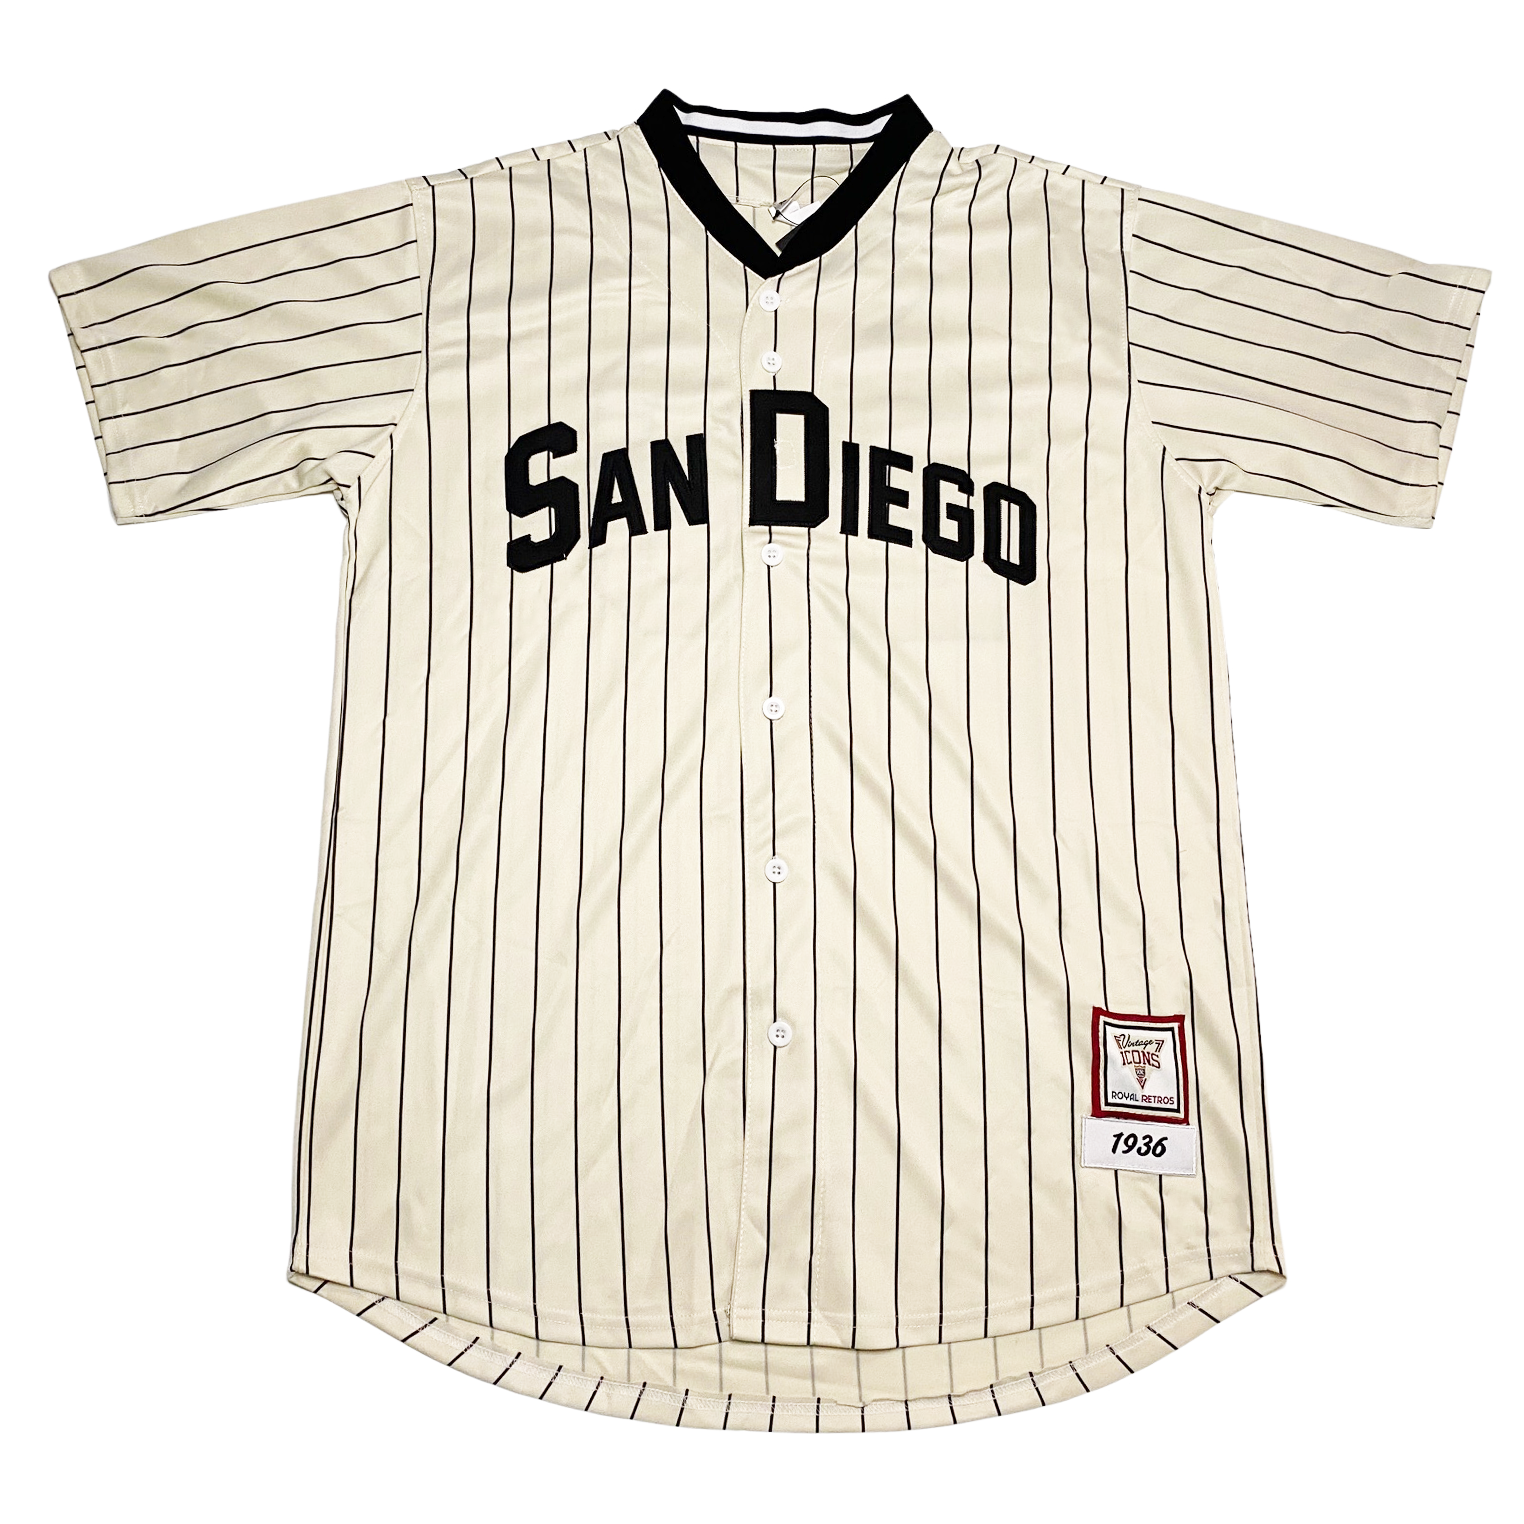 Official San Diego Padres Gear, Padres Jerseys, Store, Padres